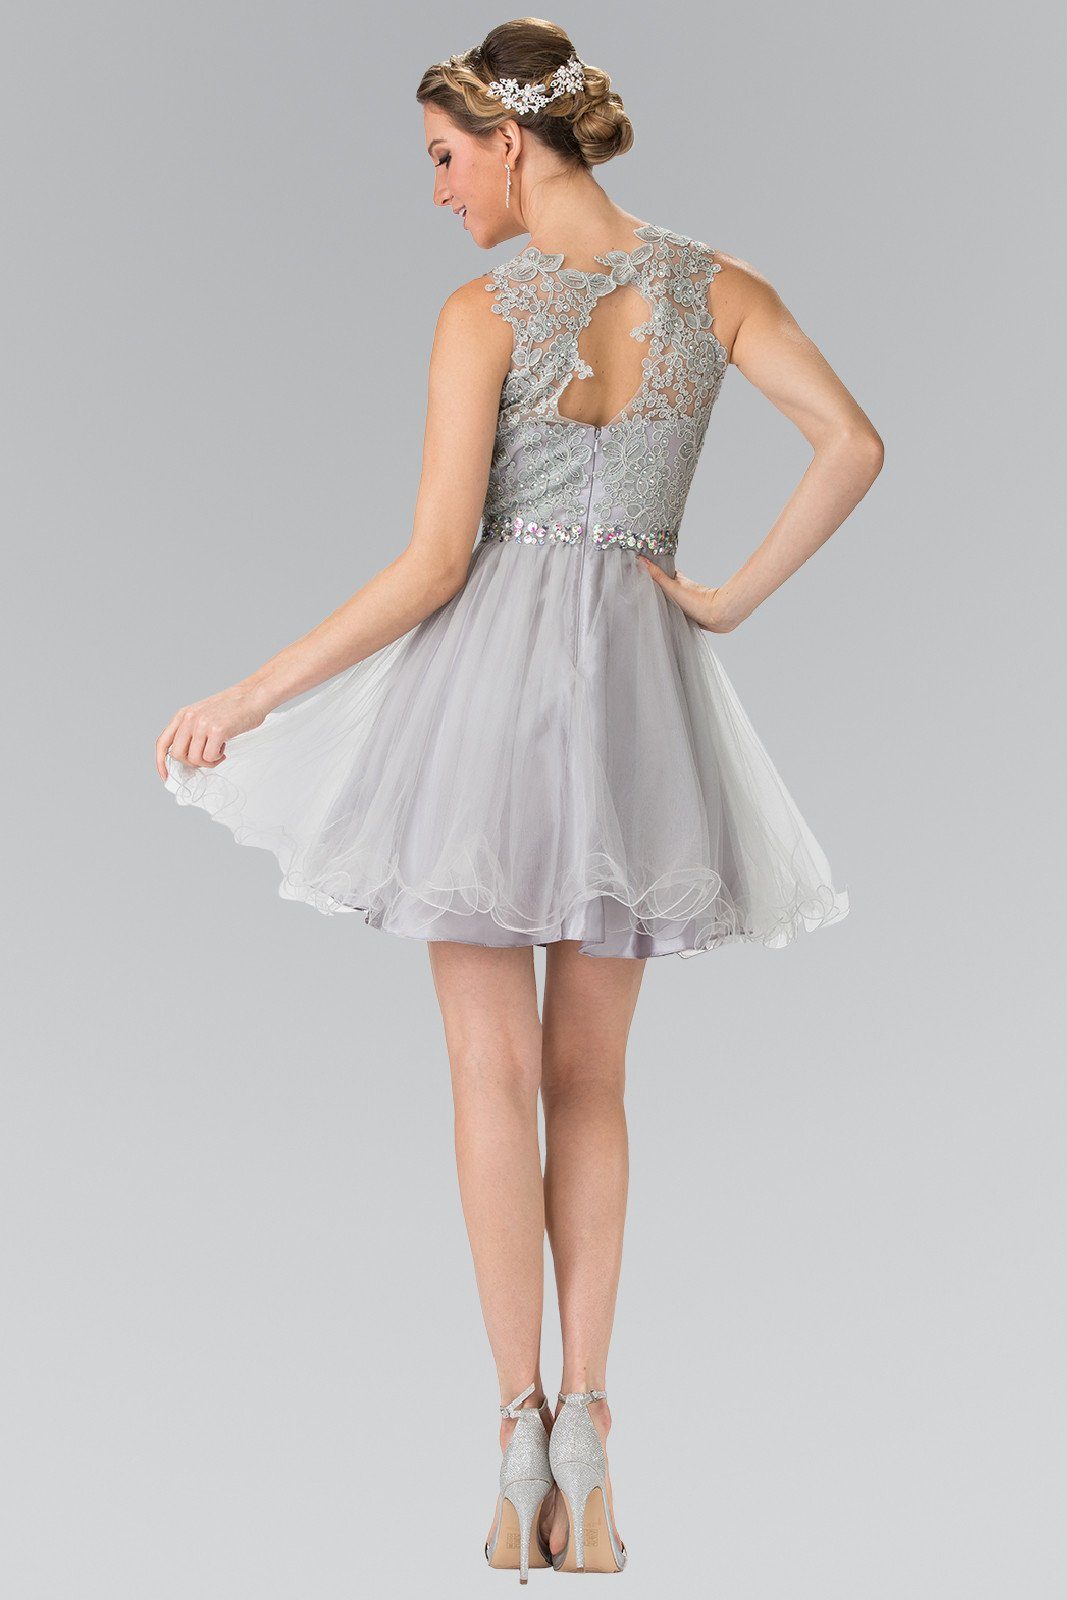 Short Sleeveless Dress with Lace Illusion Top by Elizabeth K GS2375 ...